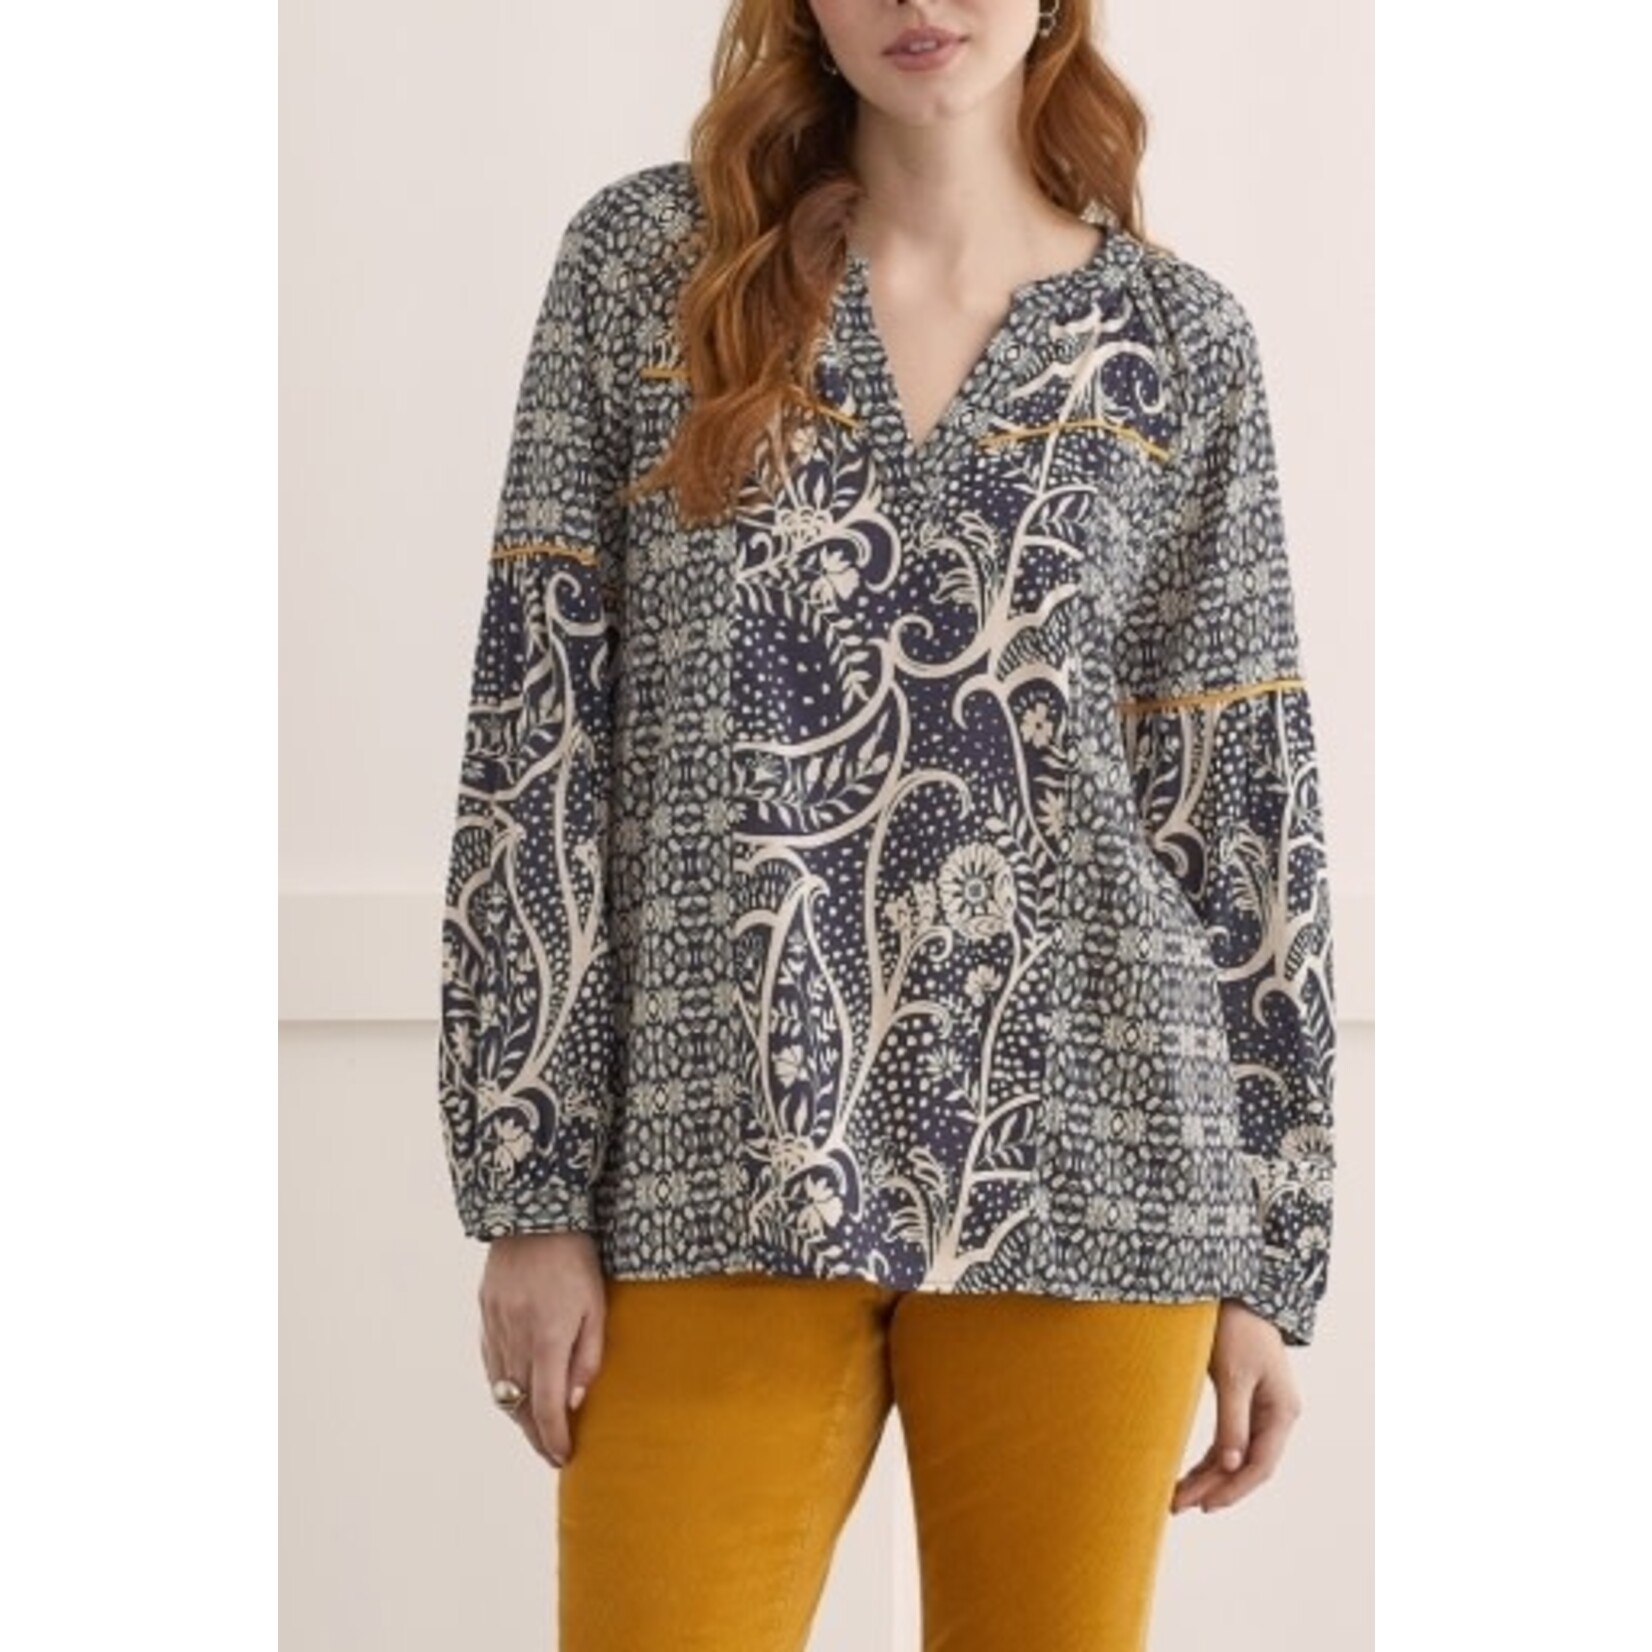 Tribal Two Pattern Printed Blouse